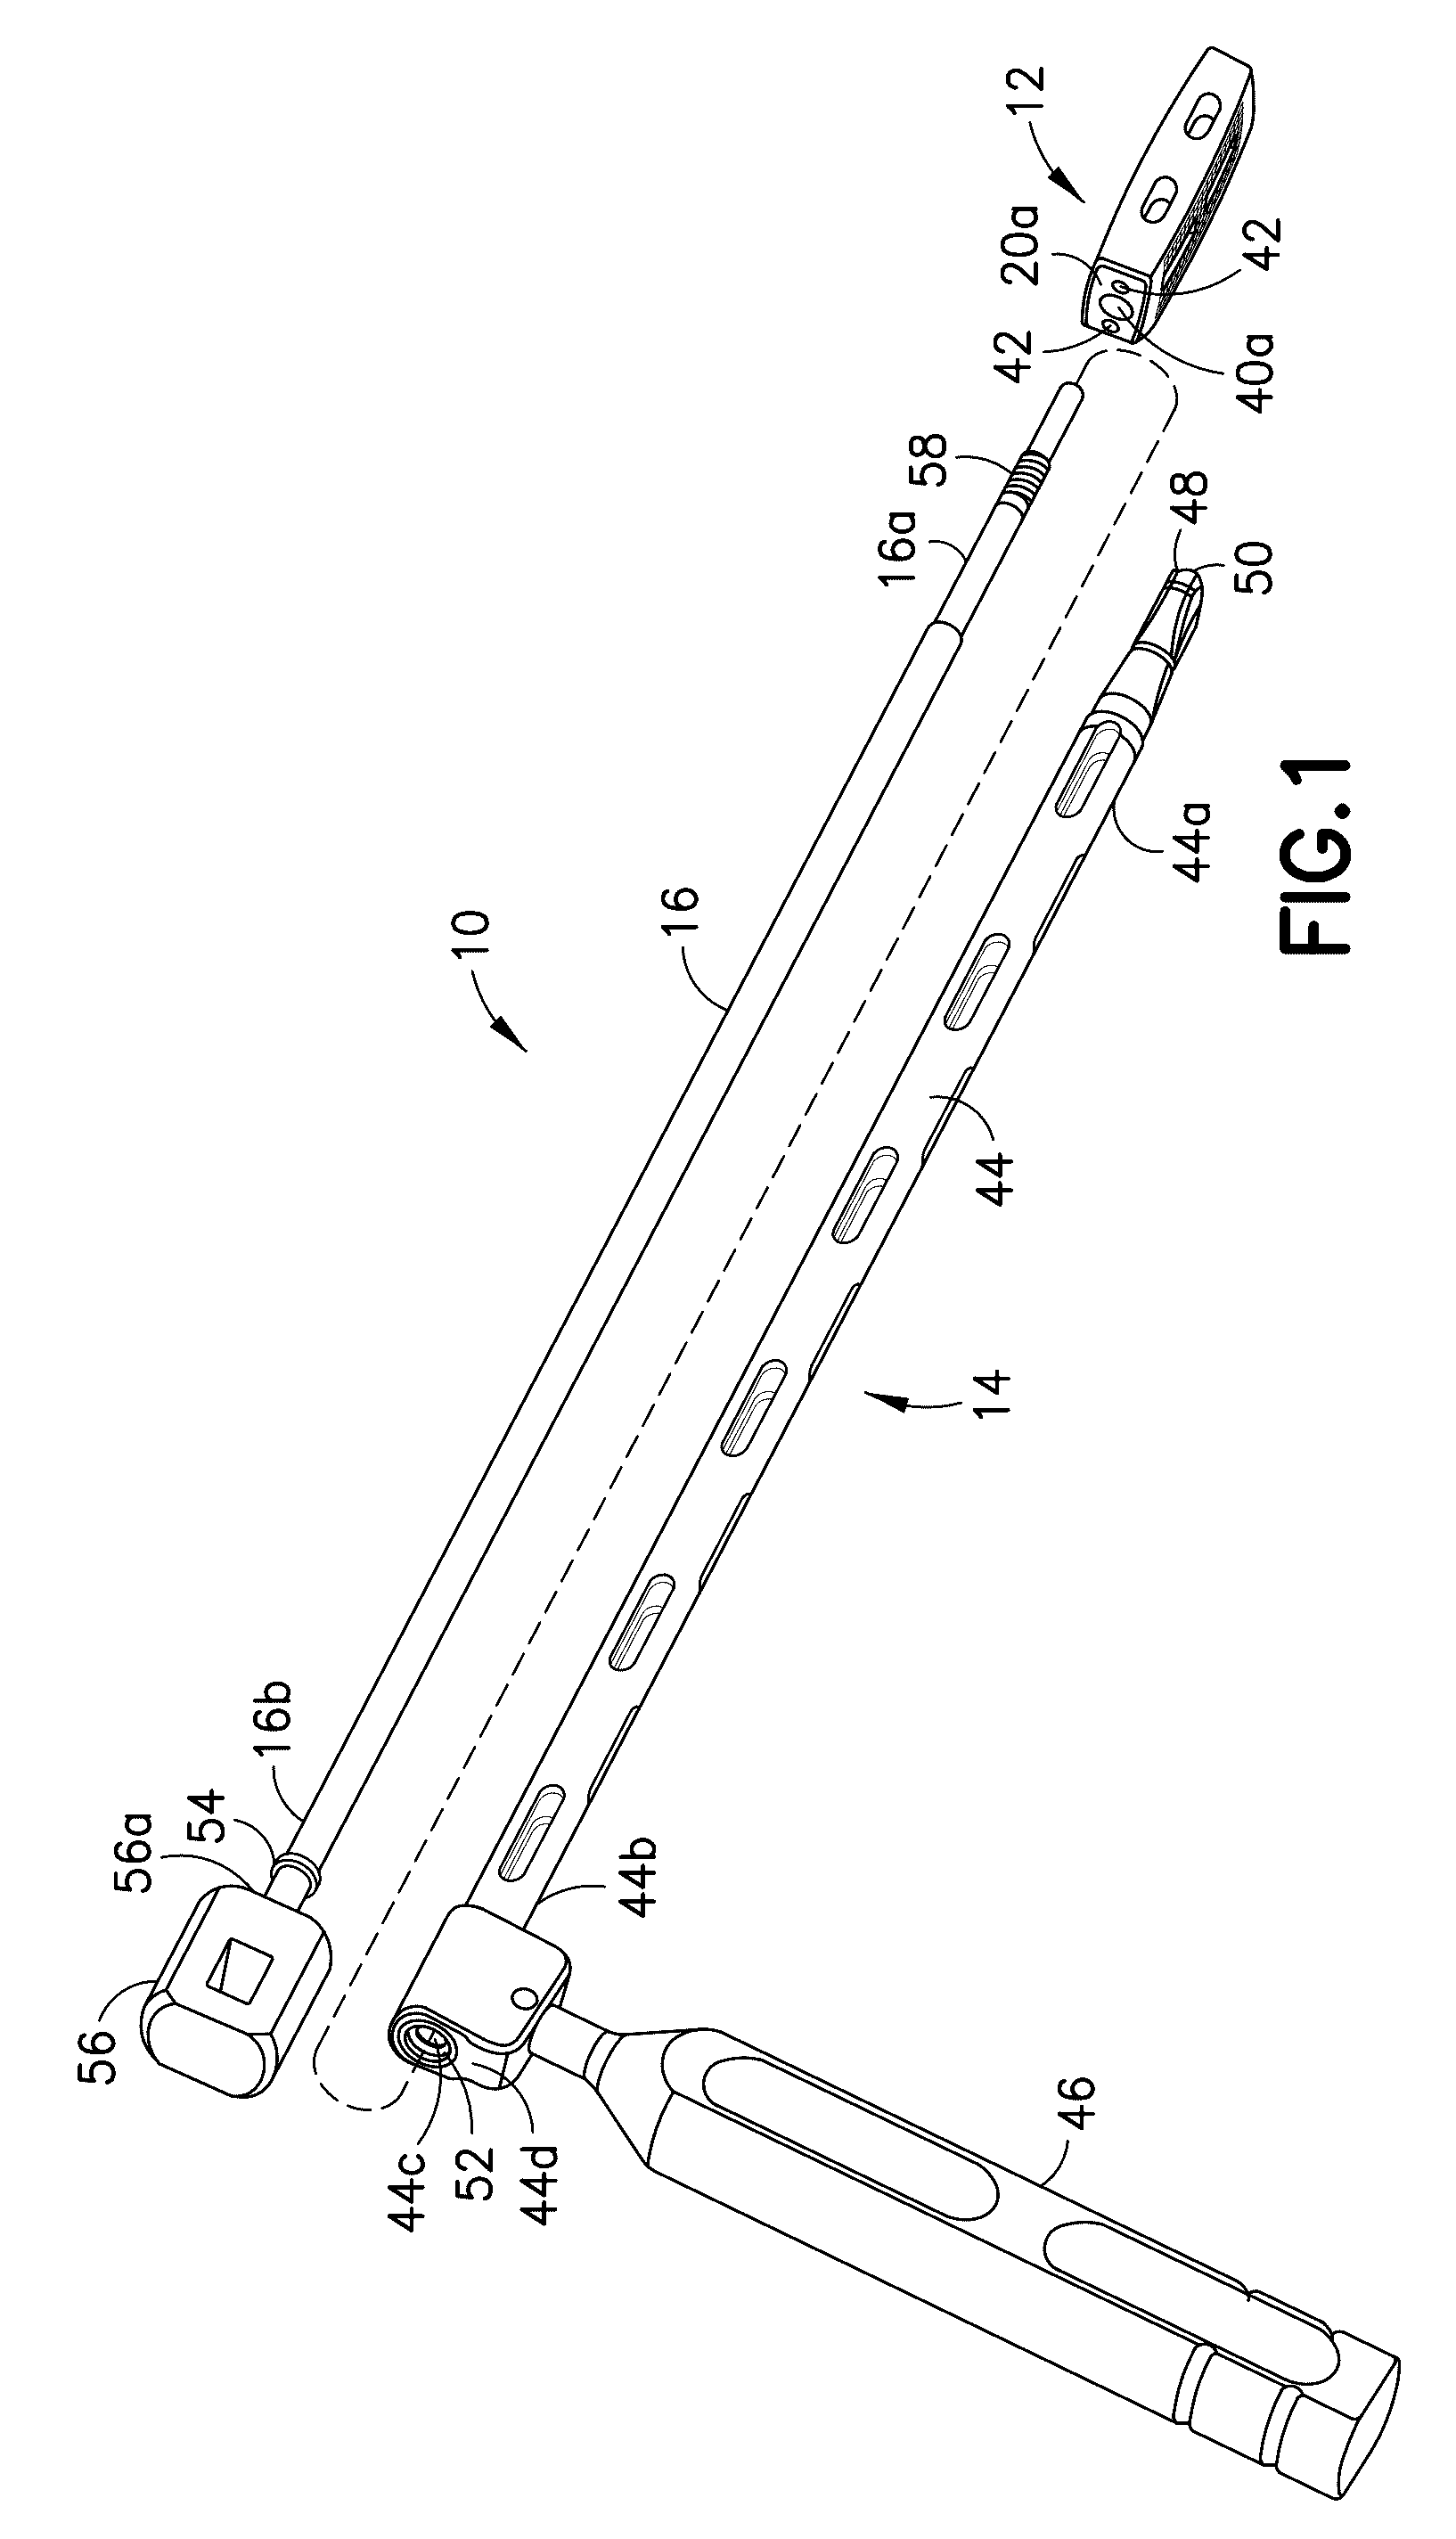 Apparatus for locating the position of a spinal implant during surgery